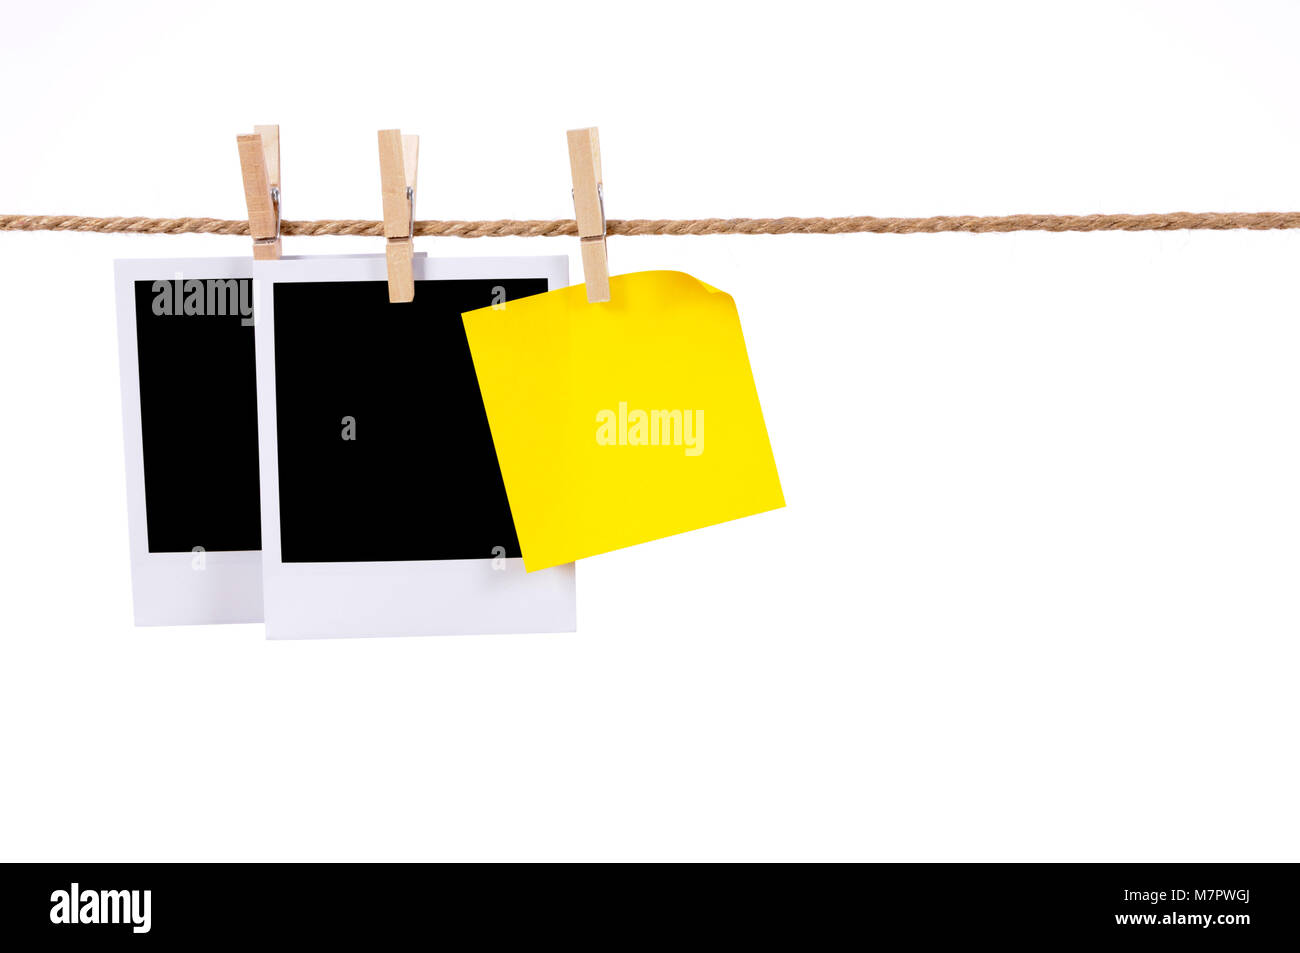 Blank instant camera photo prints and an office sticky note hanging on a rope or string isolated against a white background.  Space for copy. Stock Photo